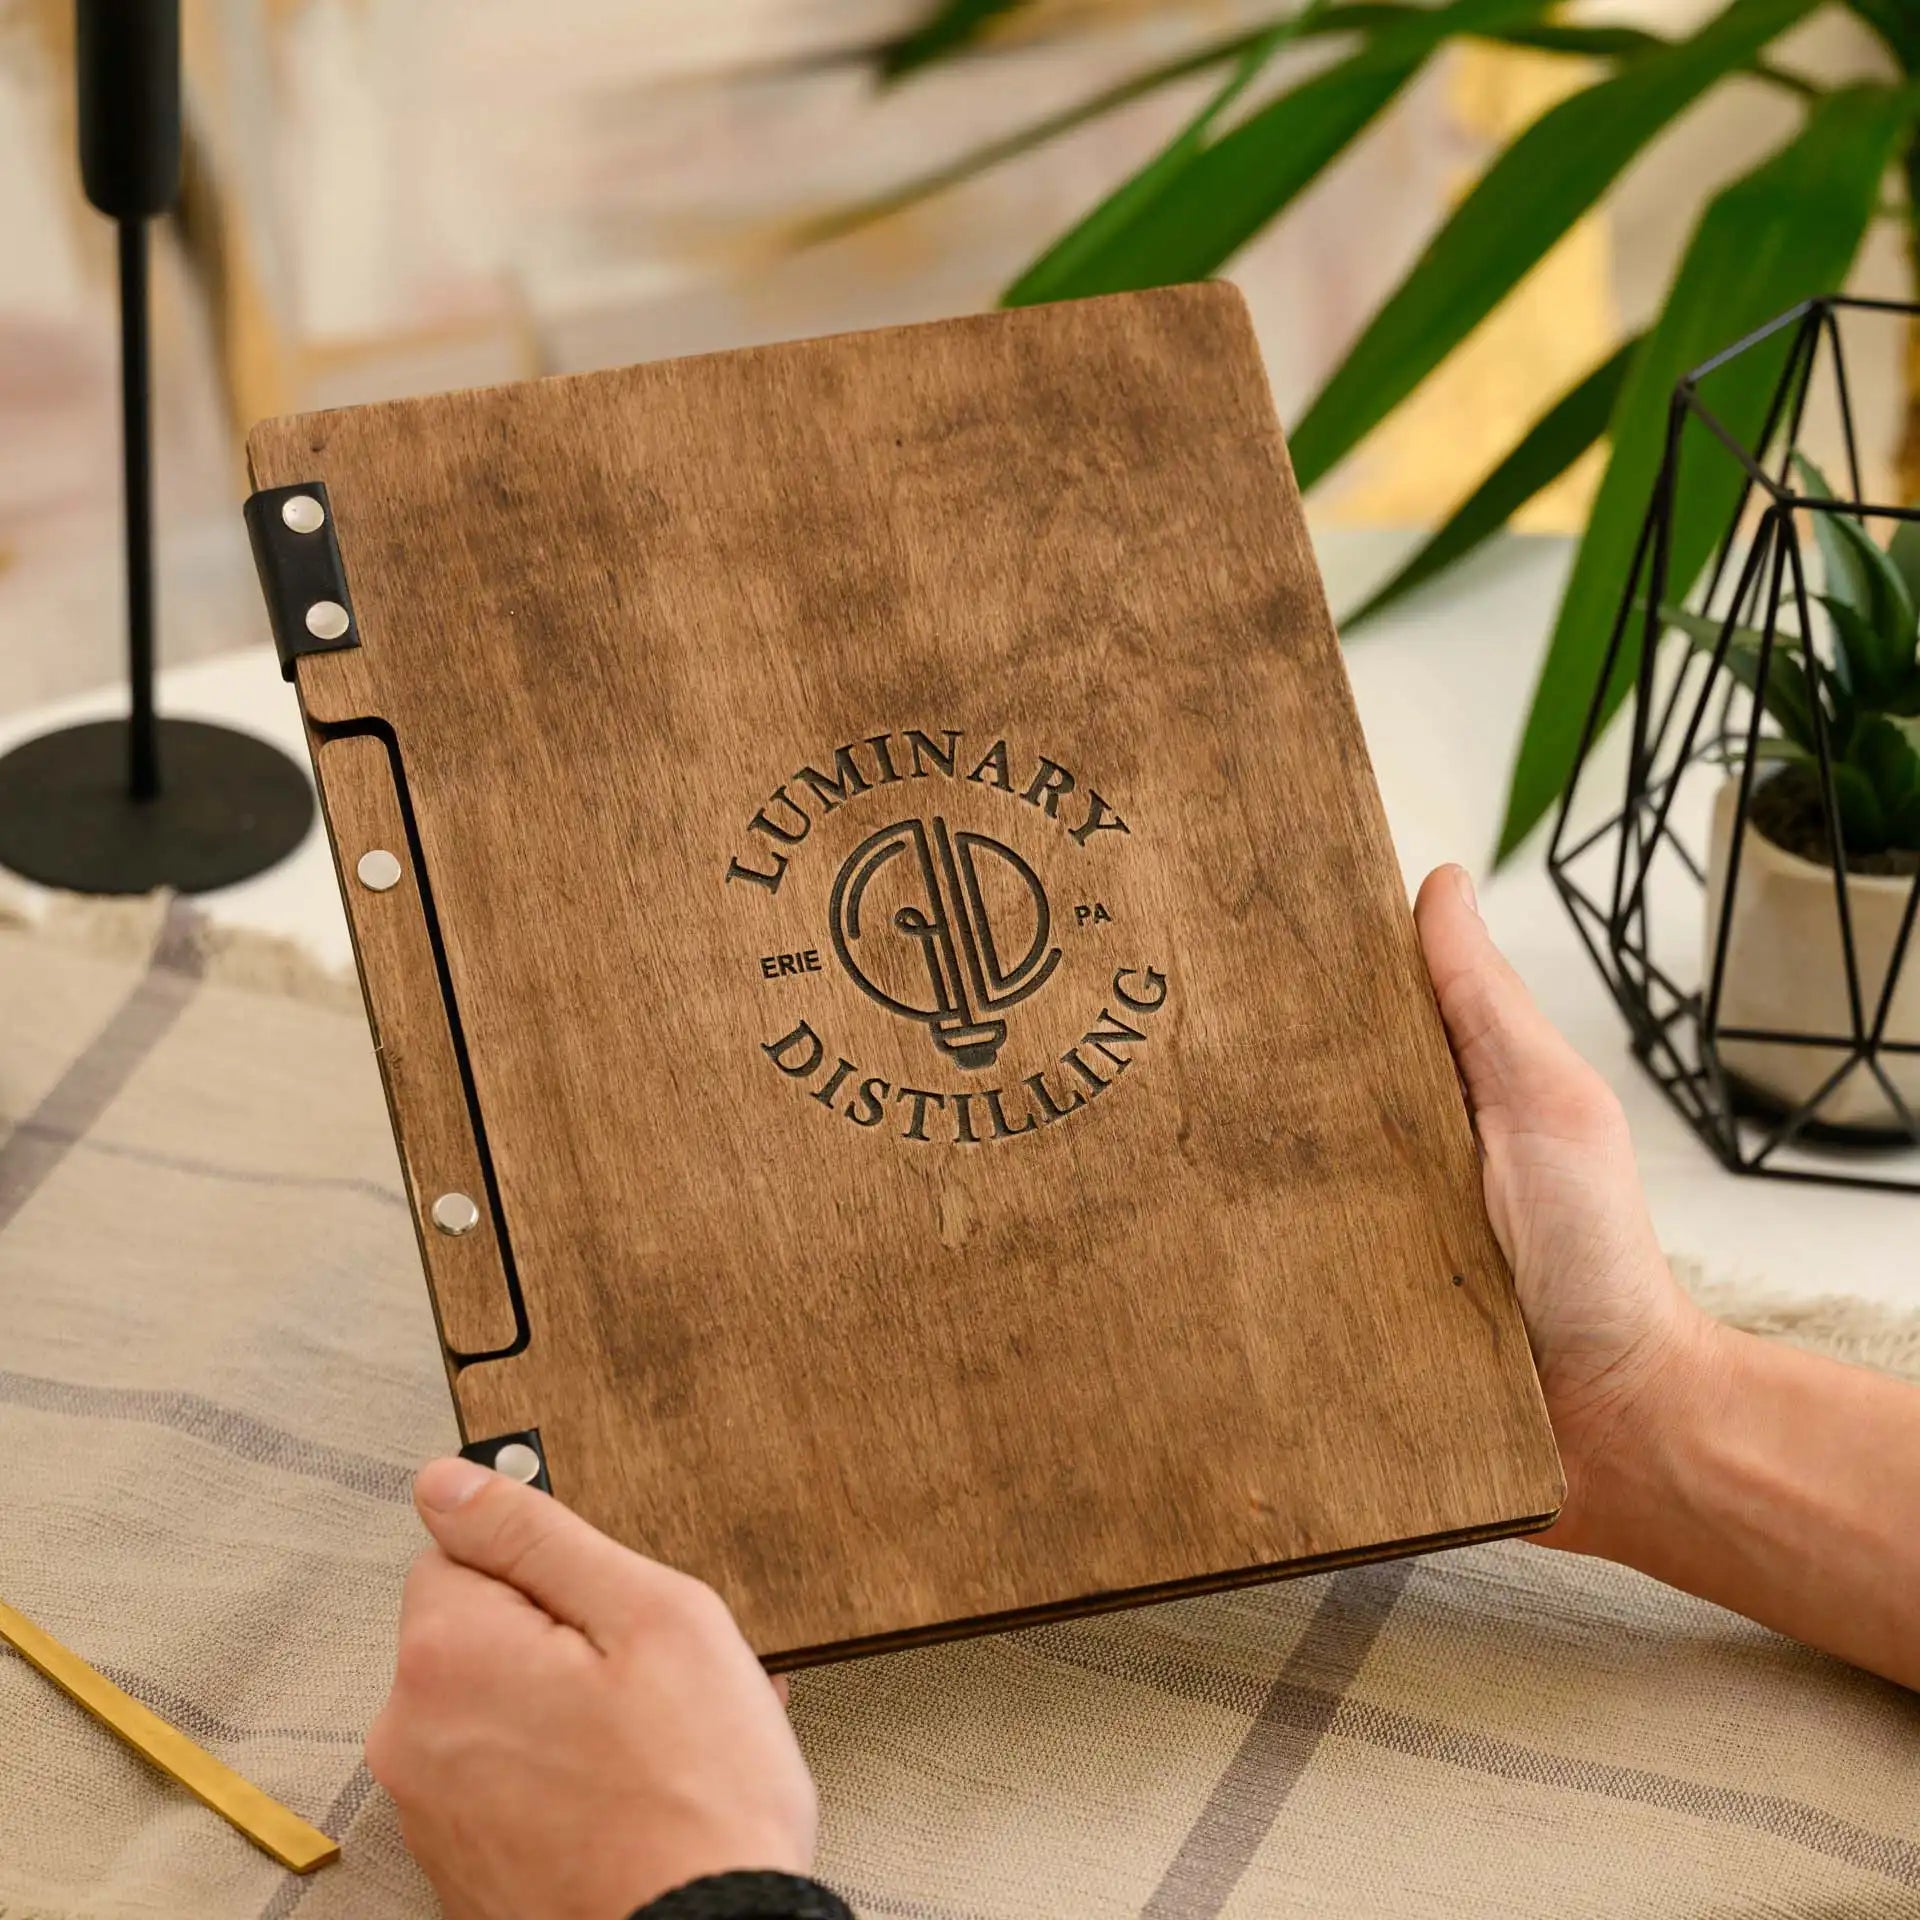 Elevate your presentation with our engraved wooden menu holder, adding rustic charm to your establishment.